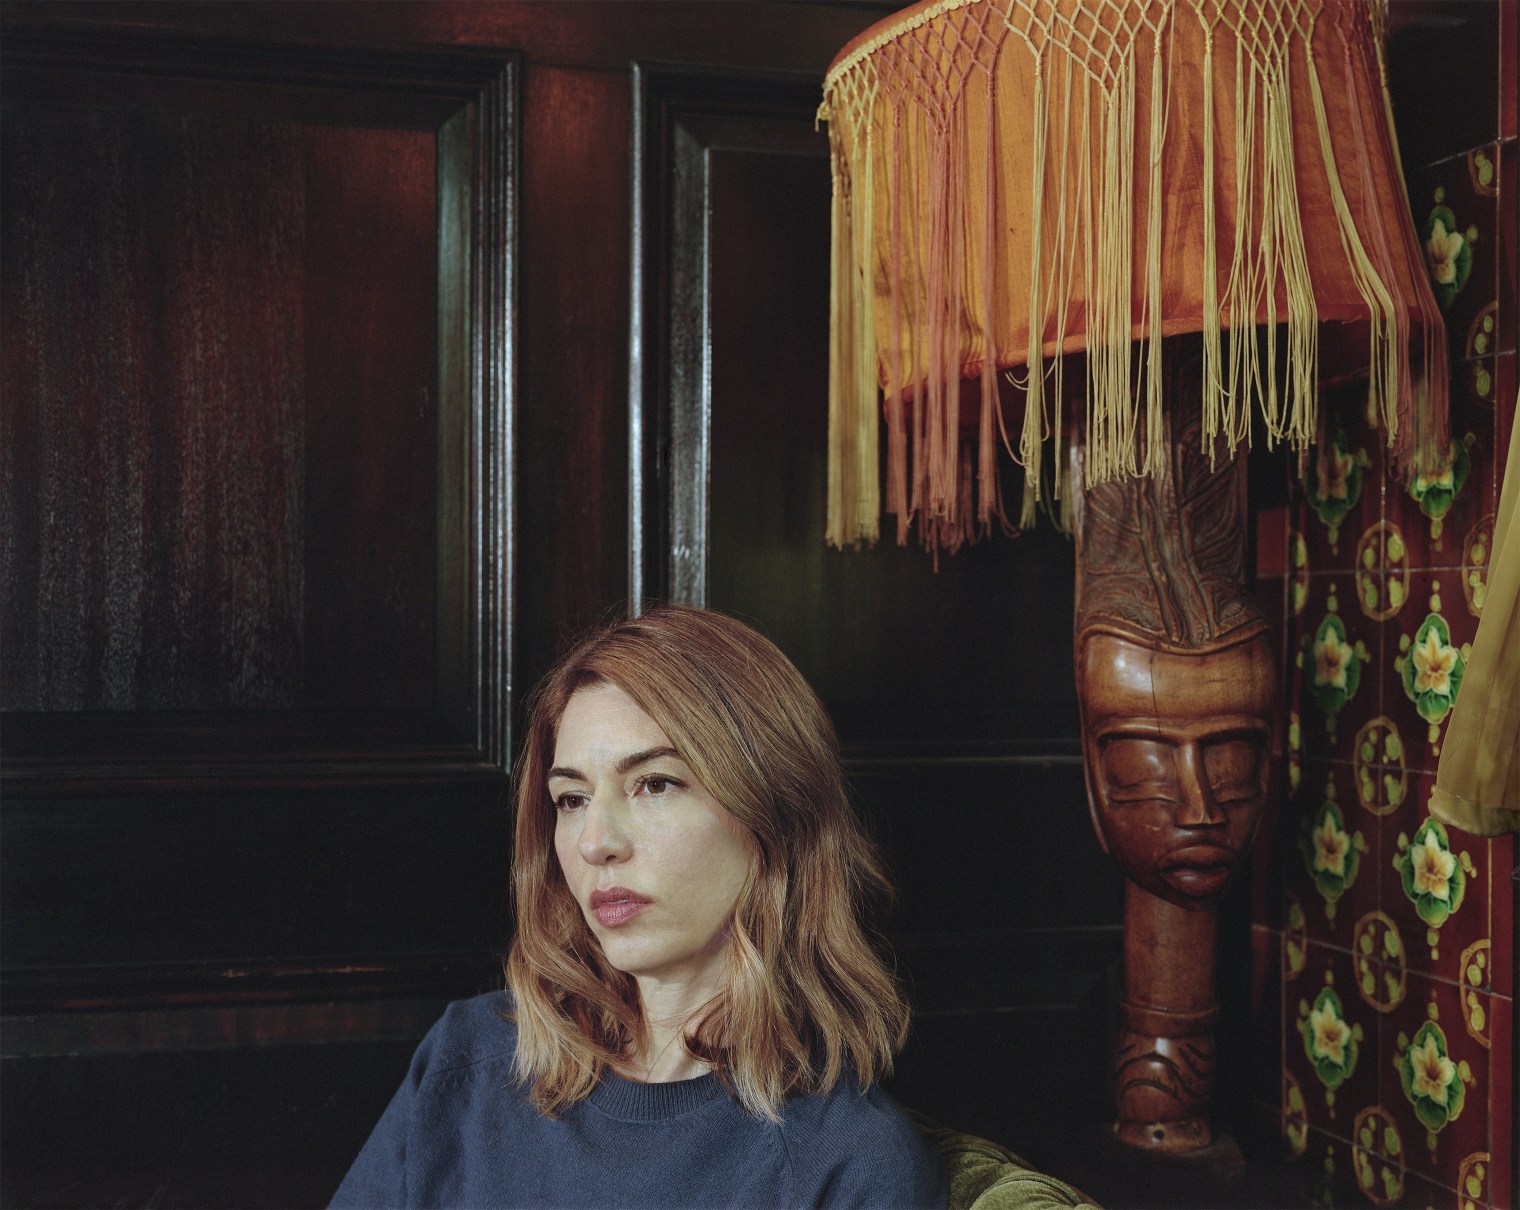 A First Look at Sofia Coppola's Deeply Personal New Book